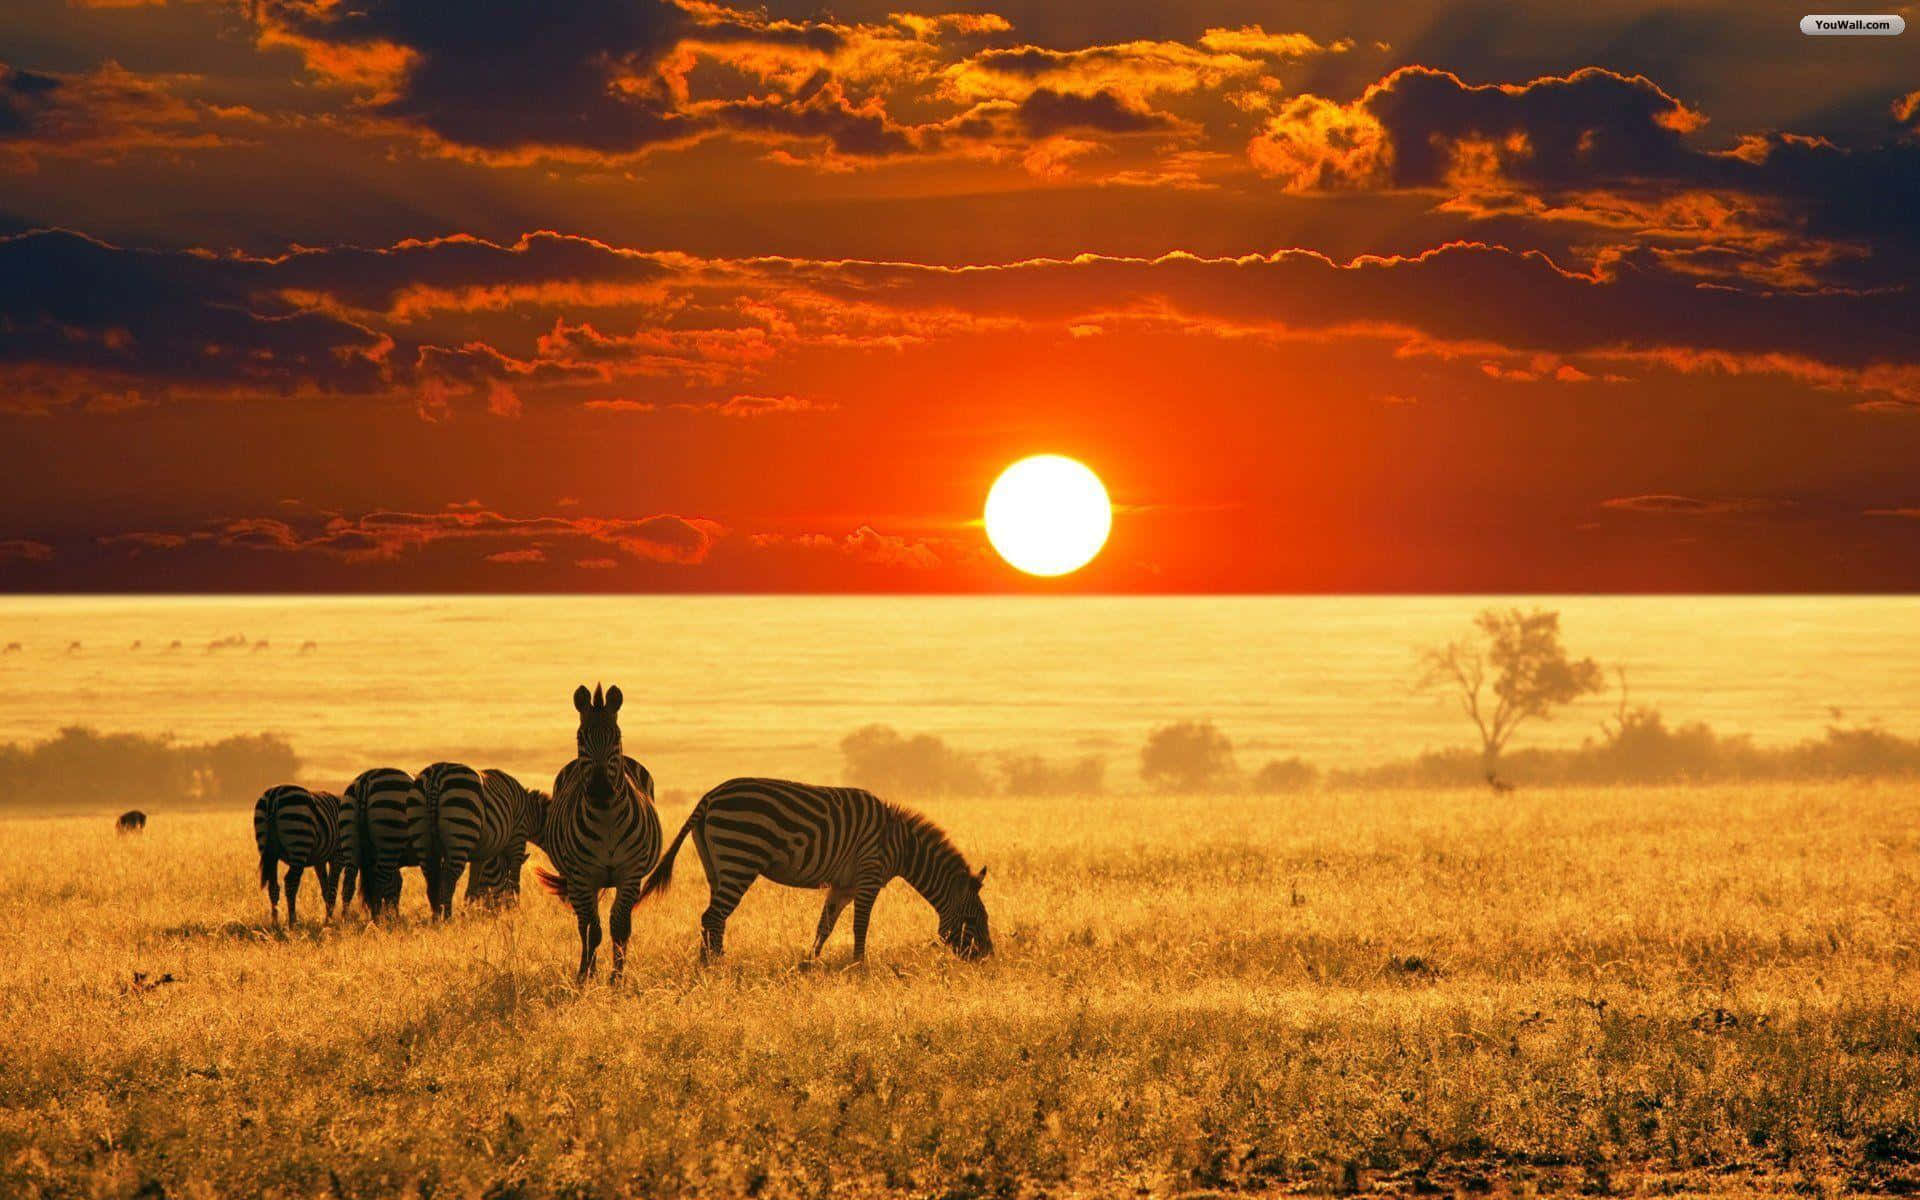 Upptäckskönheten I Afrika. (in Context Of Computer Or Mobile Wallpaper, This Could Be A Call-to-action Or Tagline Inviting Users To Download A Wallpaper Featuring The Beauty Of Africa.) Wallpaper